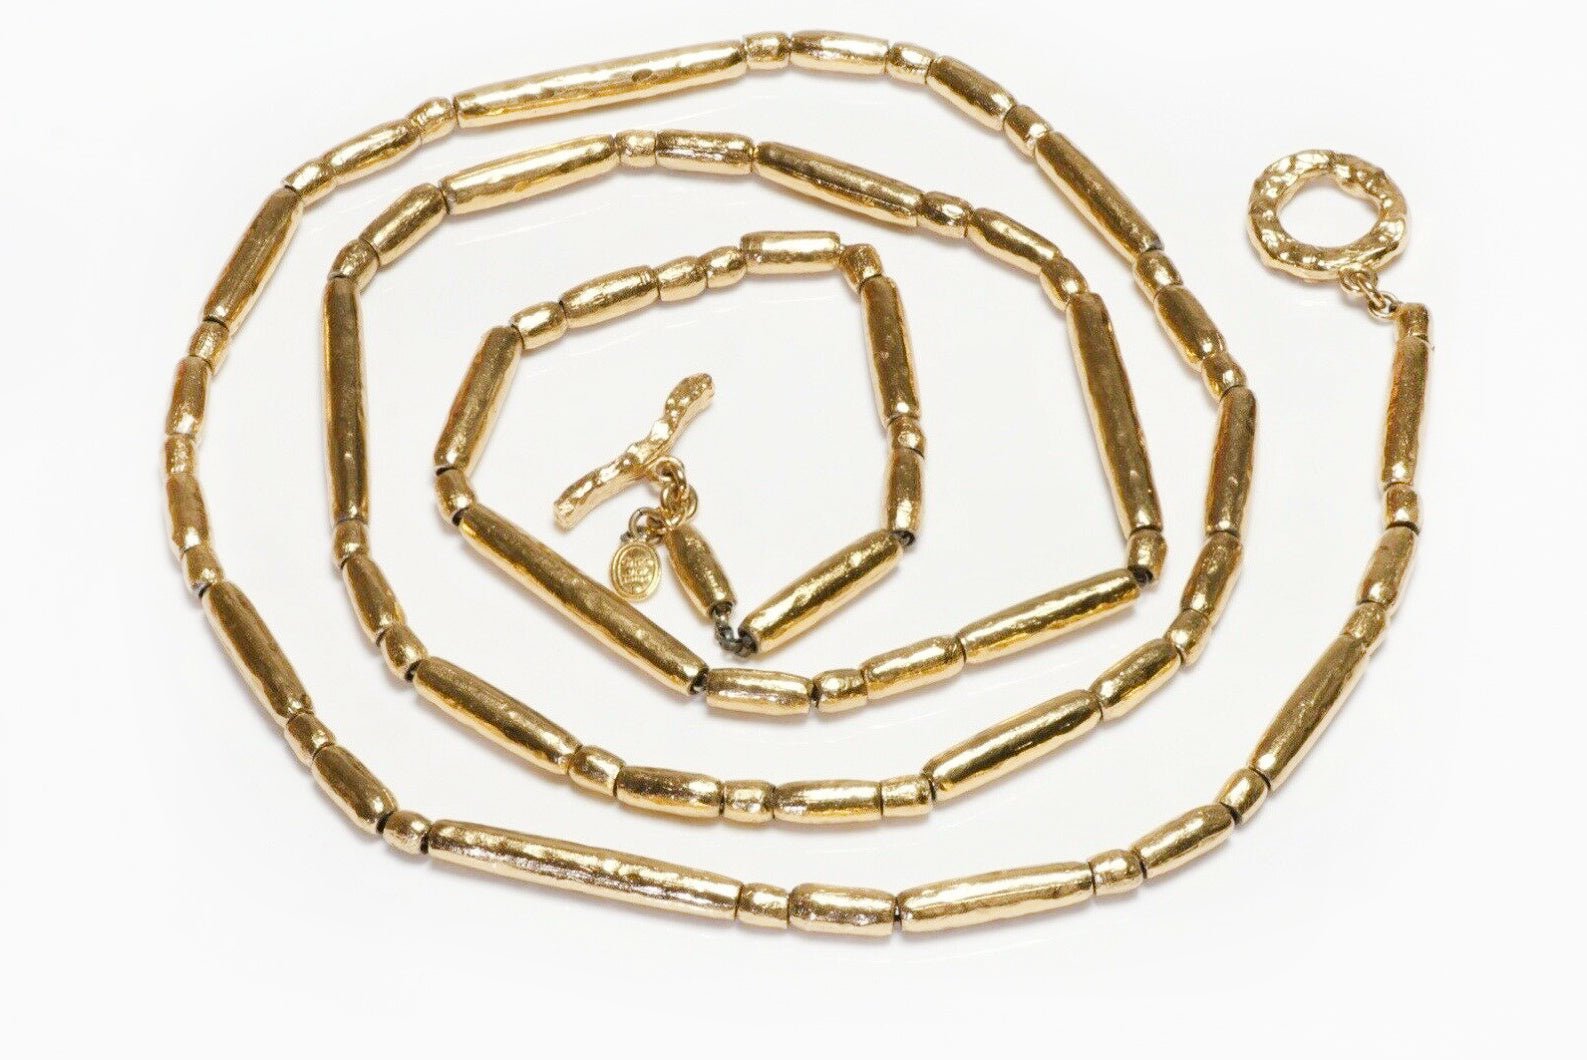 Christian Dior Boutique Gold Plated Bamboo Chain Necklace